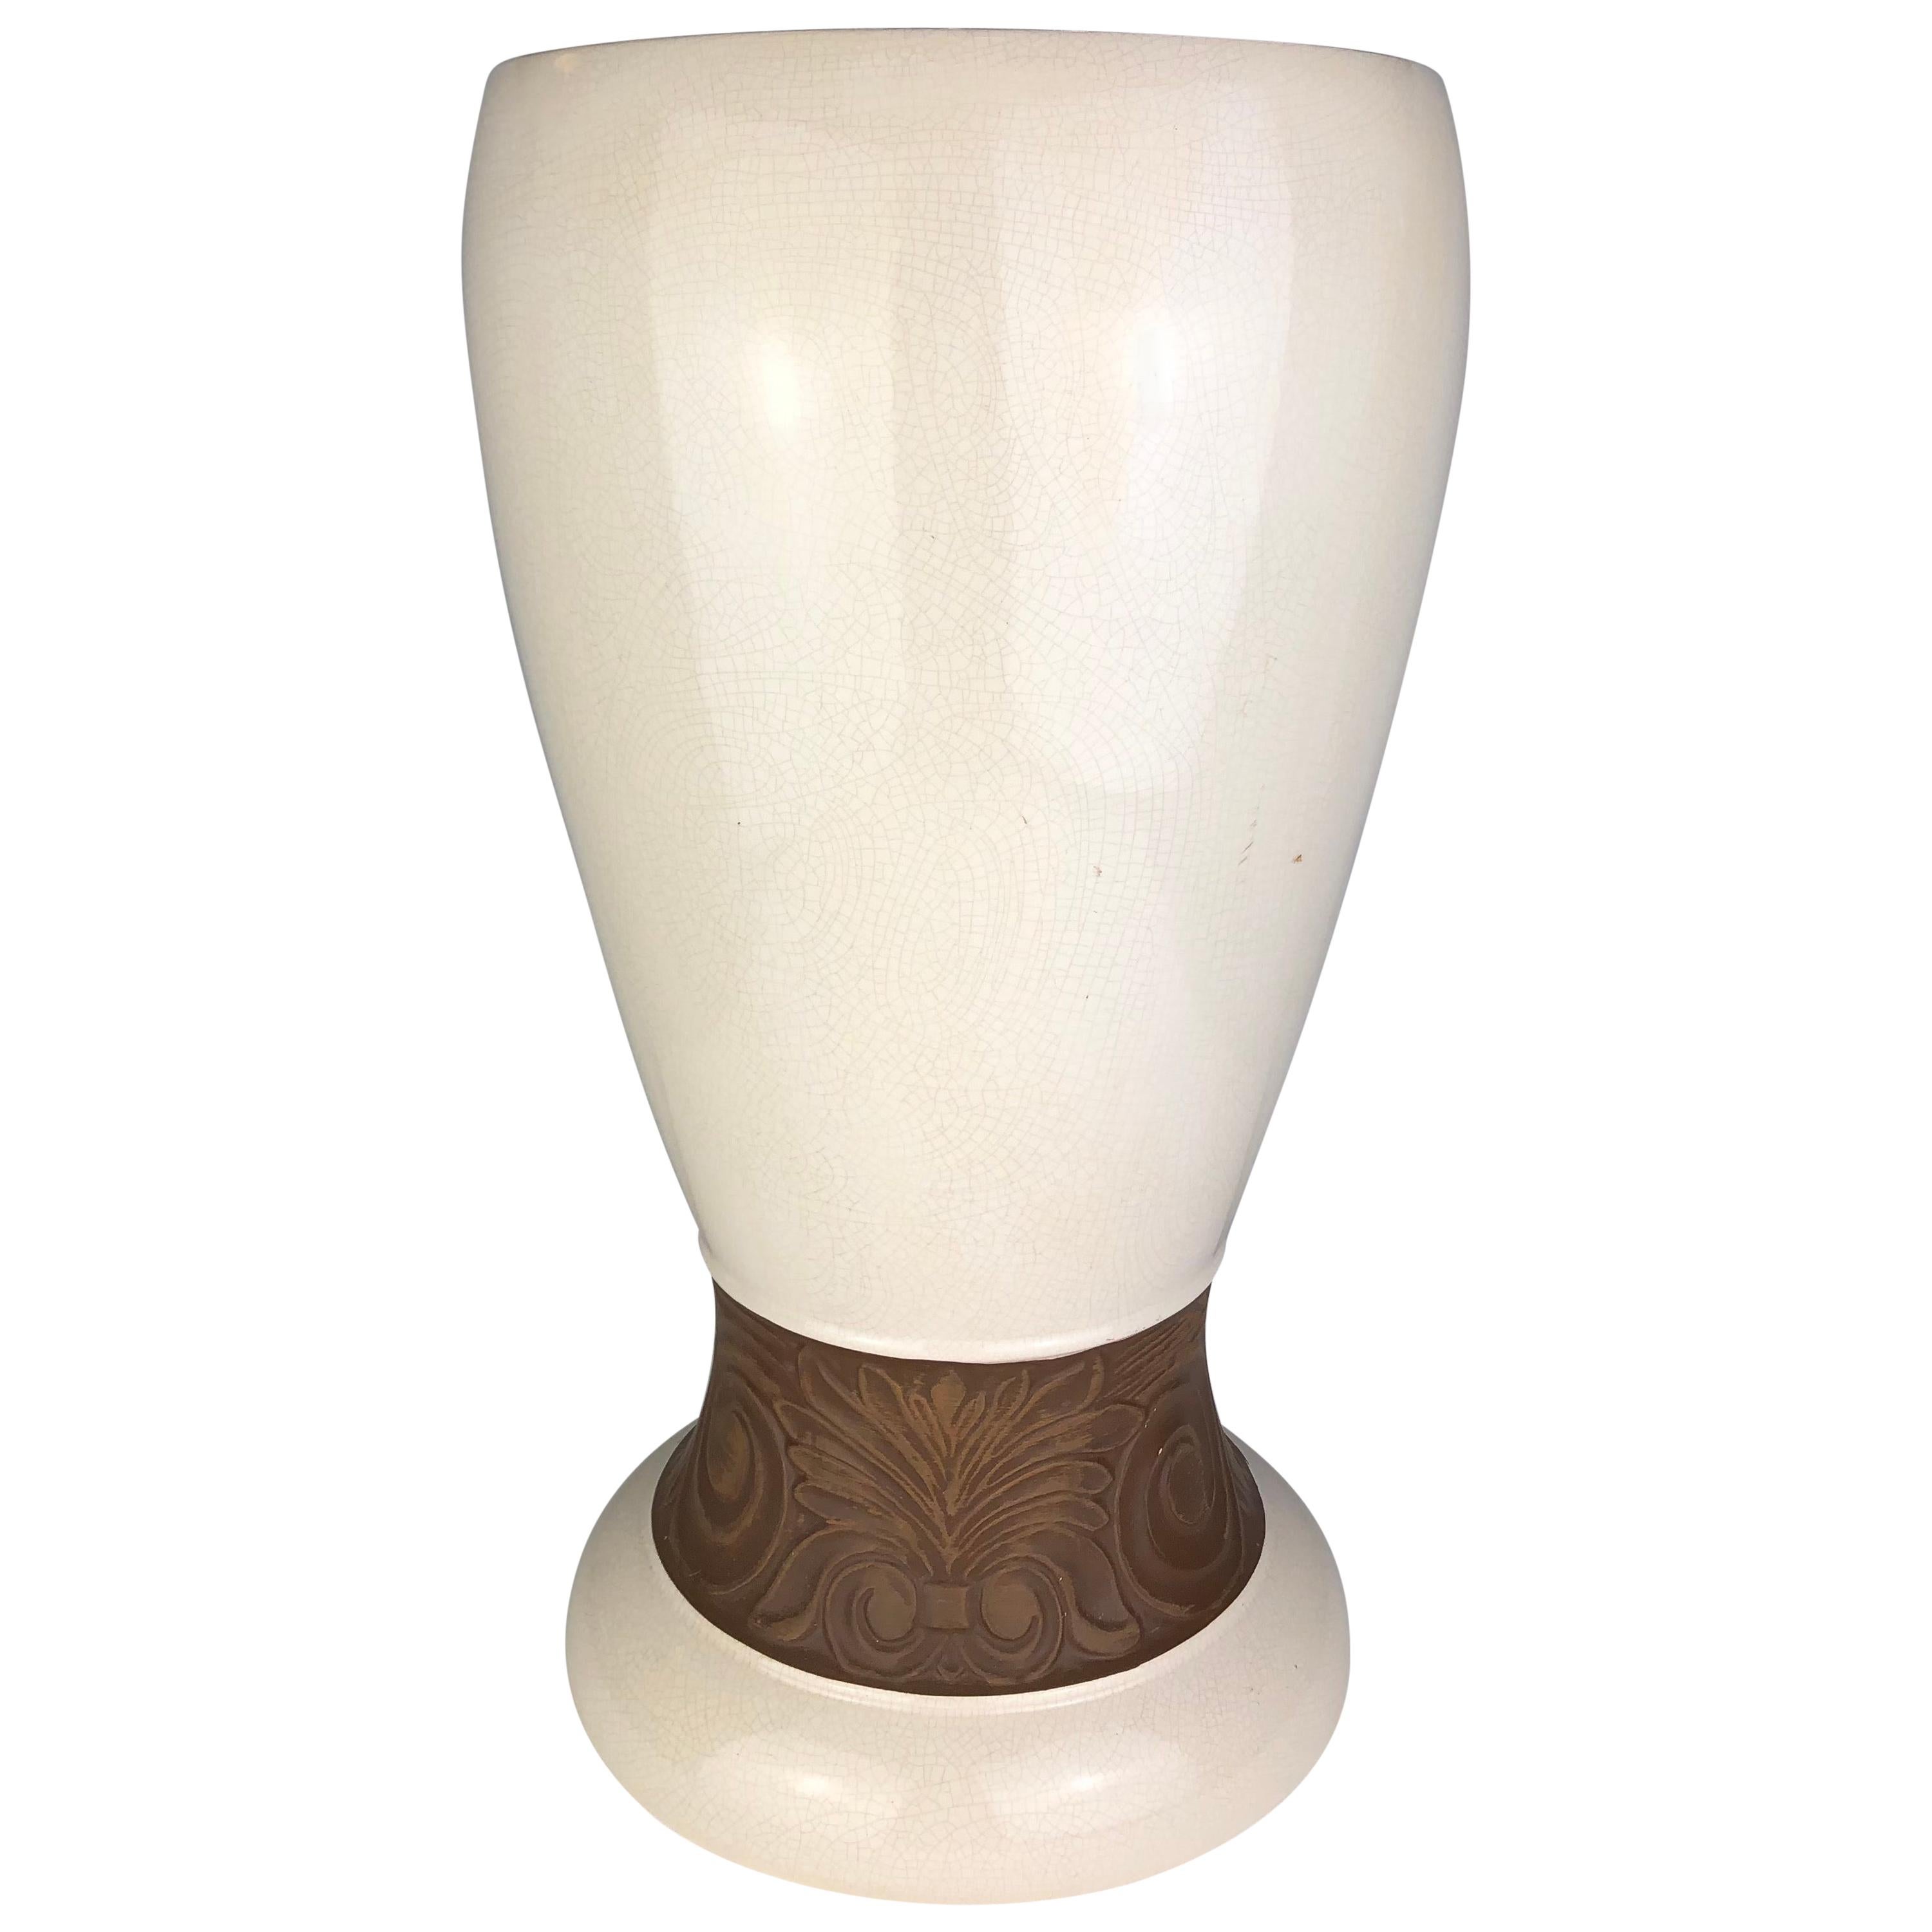 Stunning Art Deco ceramic vase by Saint Clement, France with white crackle glaze finish and floral decor near the bottom, circa 1930s. 

The crackle clear glaze was a popular technique for animal and figural statues as well as decorative vases